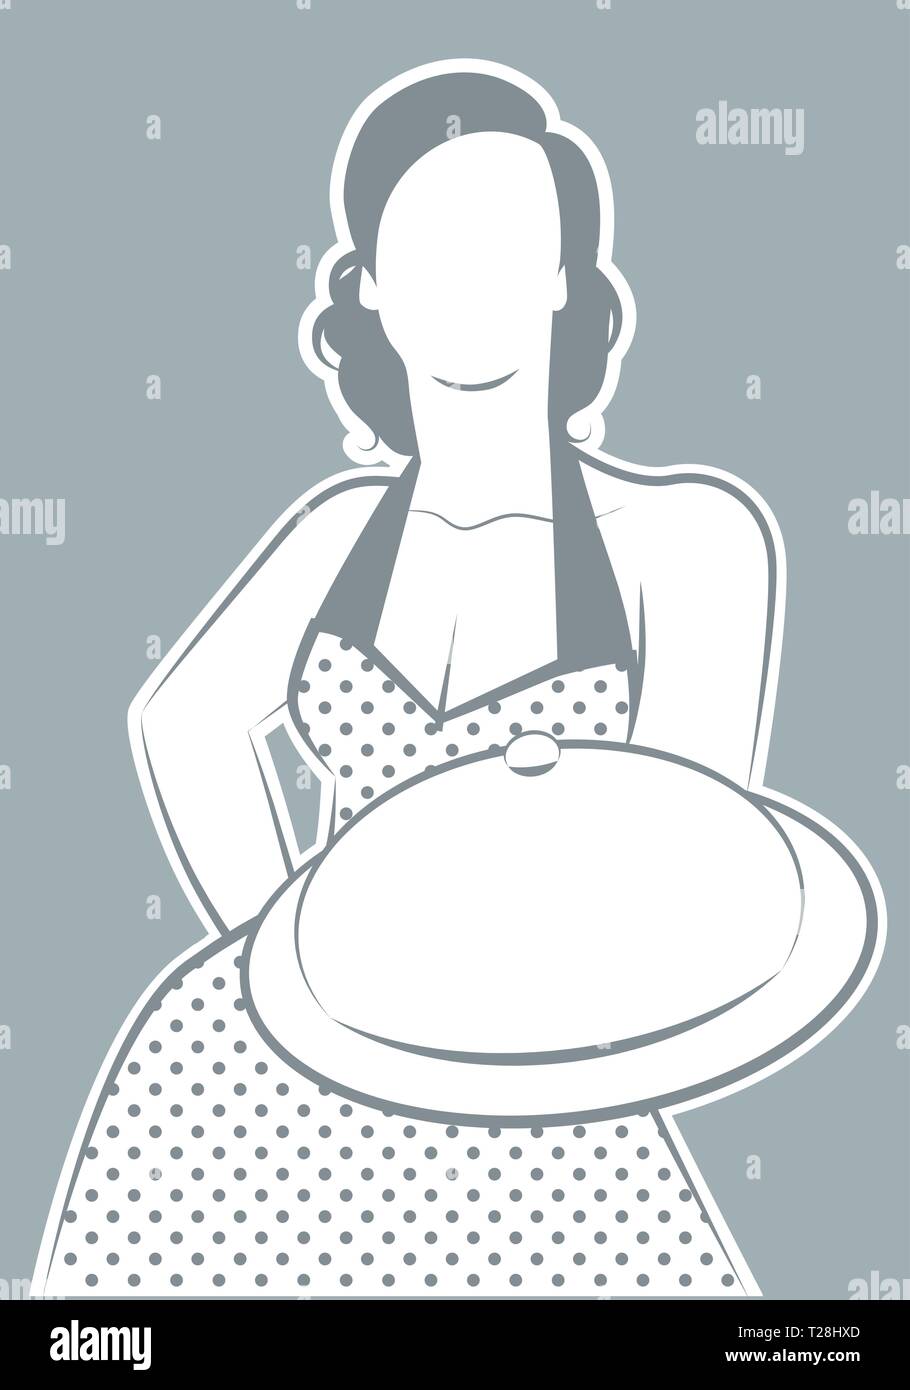 Retro housewife cook wearing polka dot dress showing a plate or tray Stock Vector